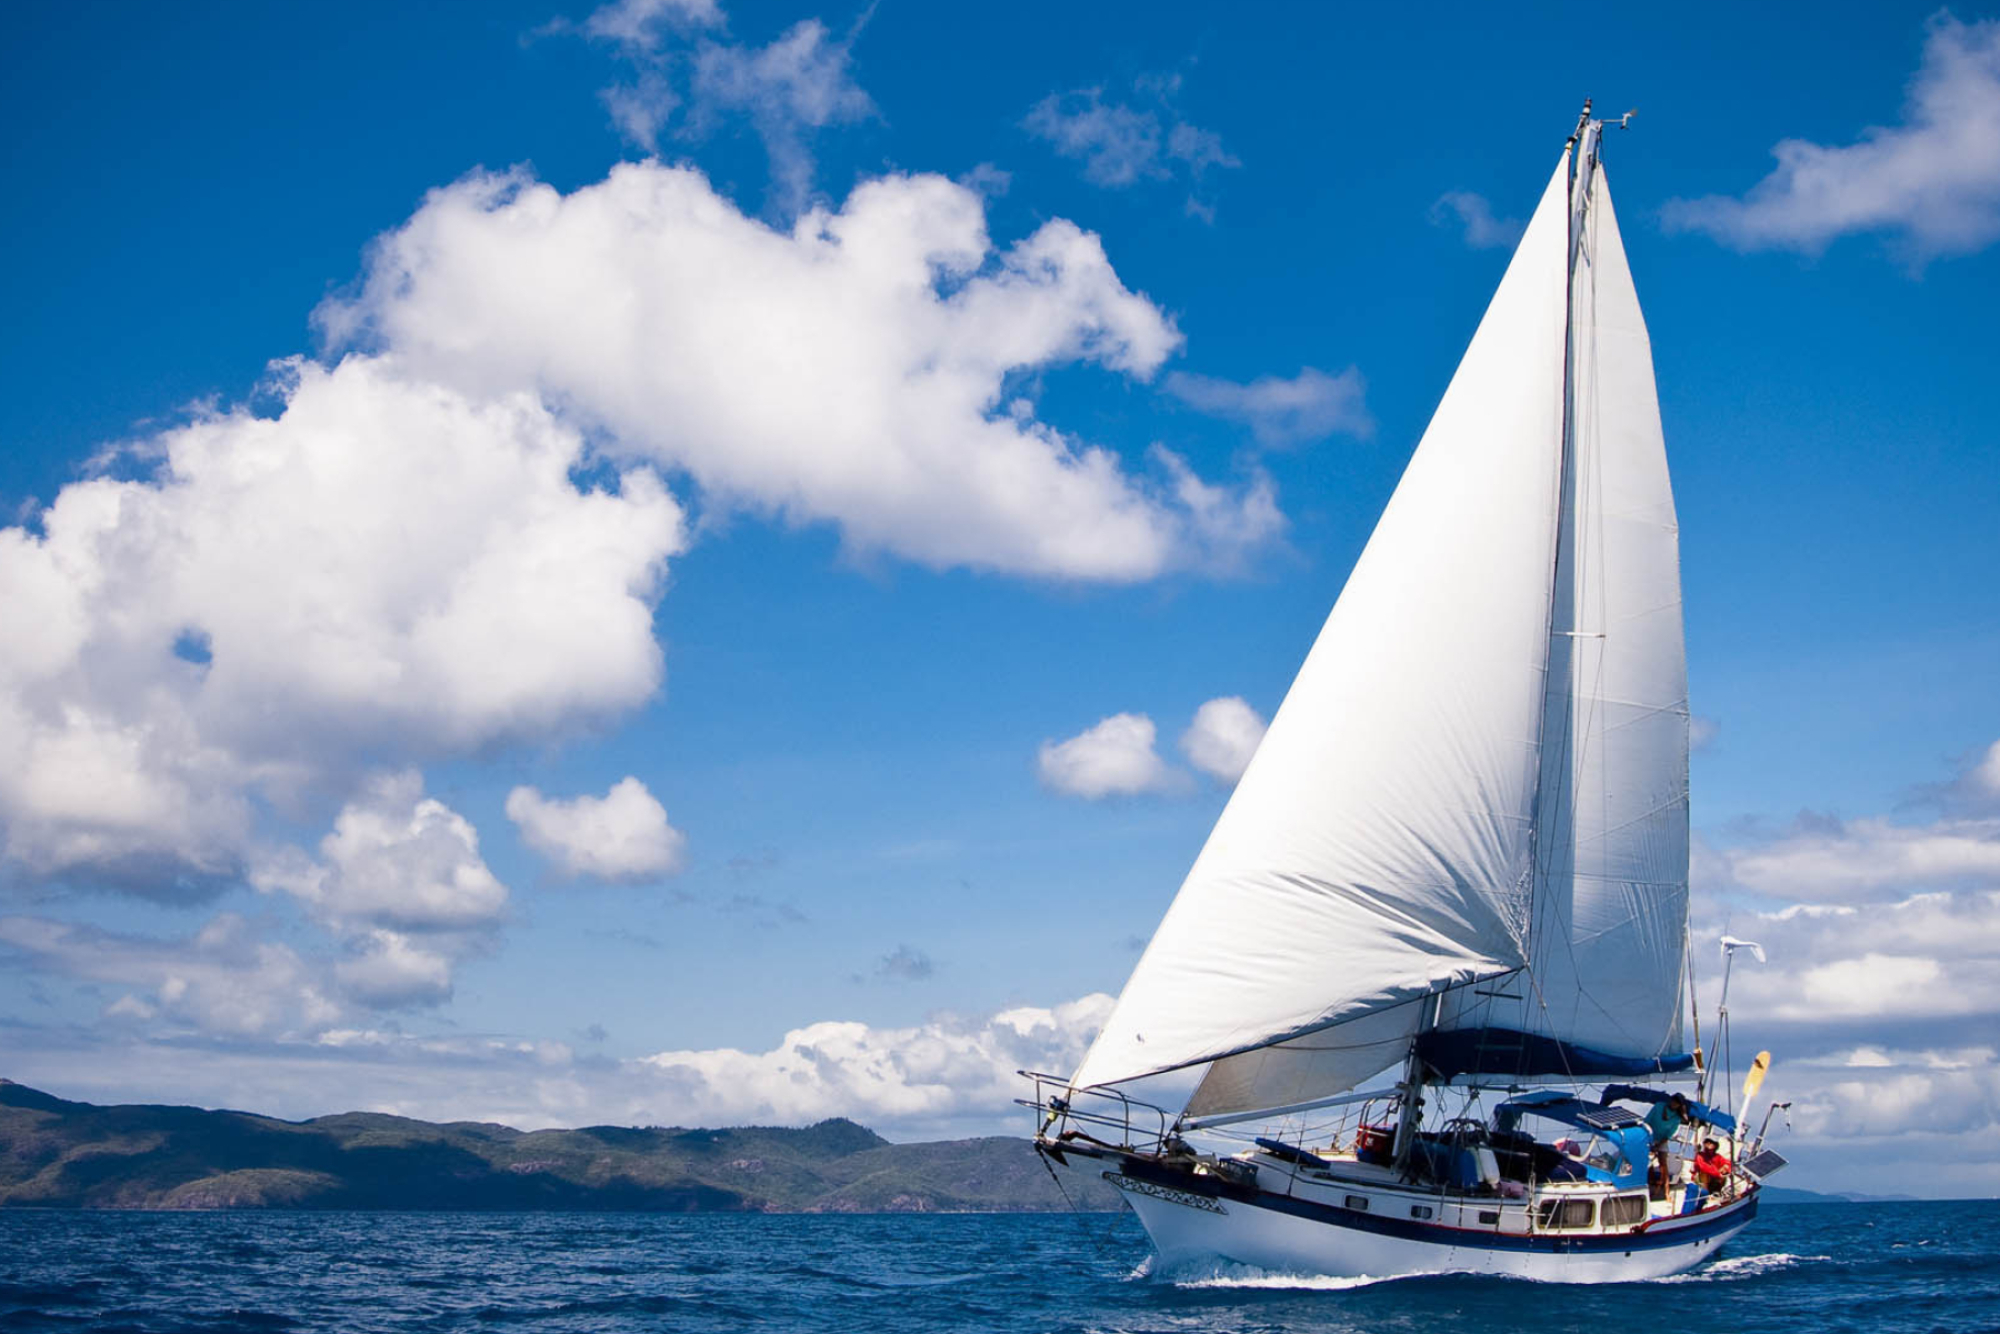 Sailing: A sport of overcoming the distance on the water, A voyage at the sea. 2000x1340 HD Wallpaper.